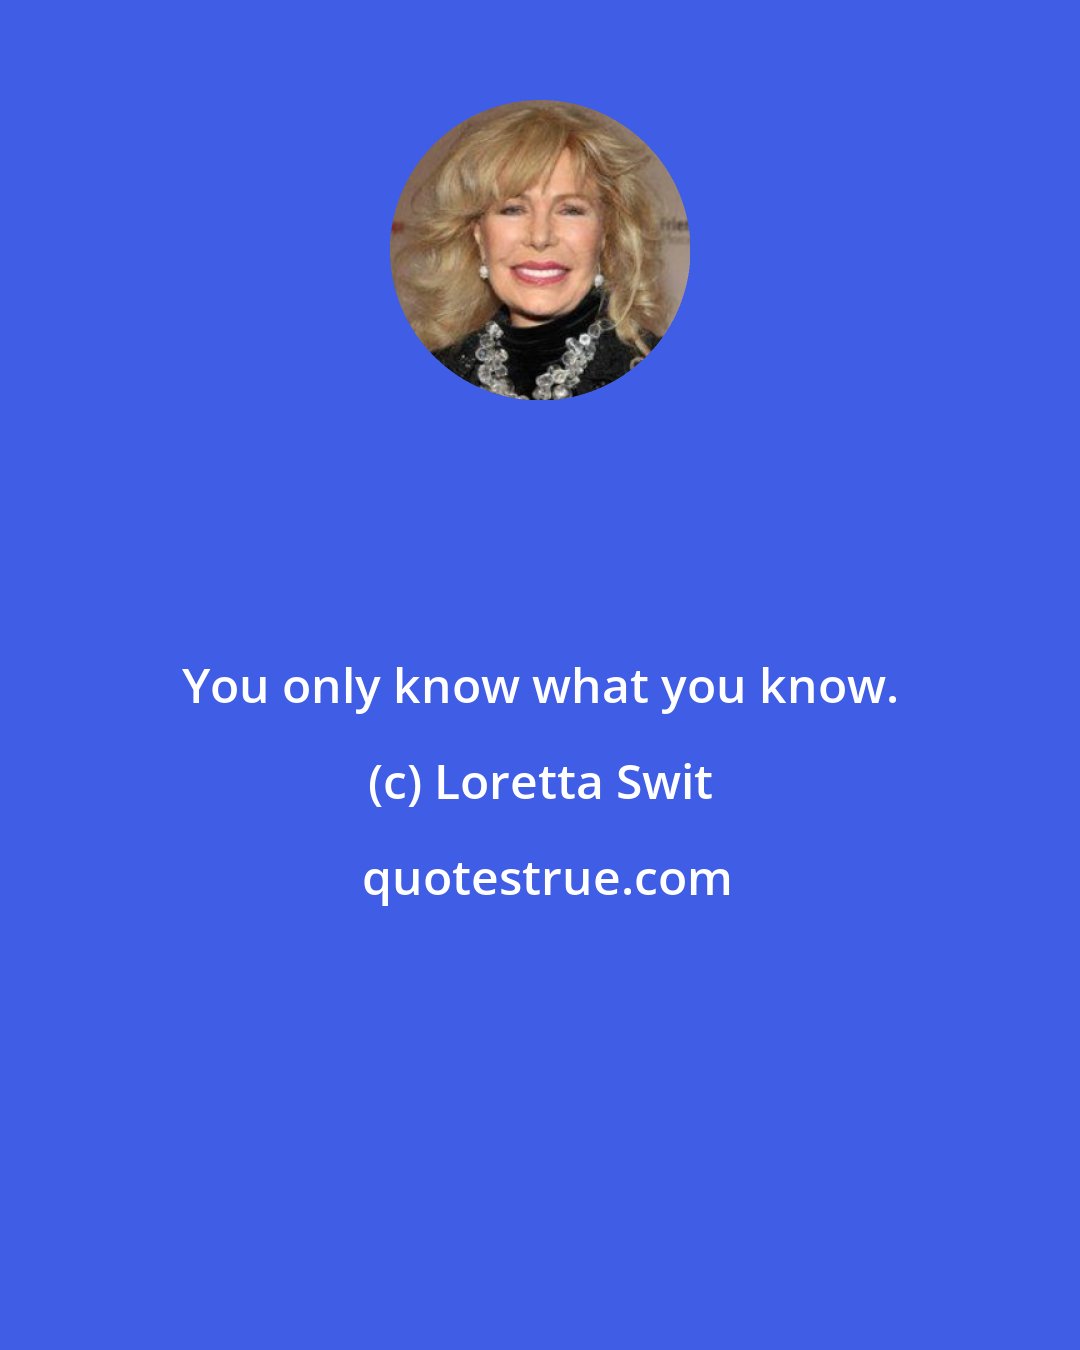 Loretta Swit: You only know what you know.